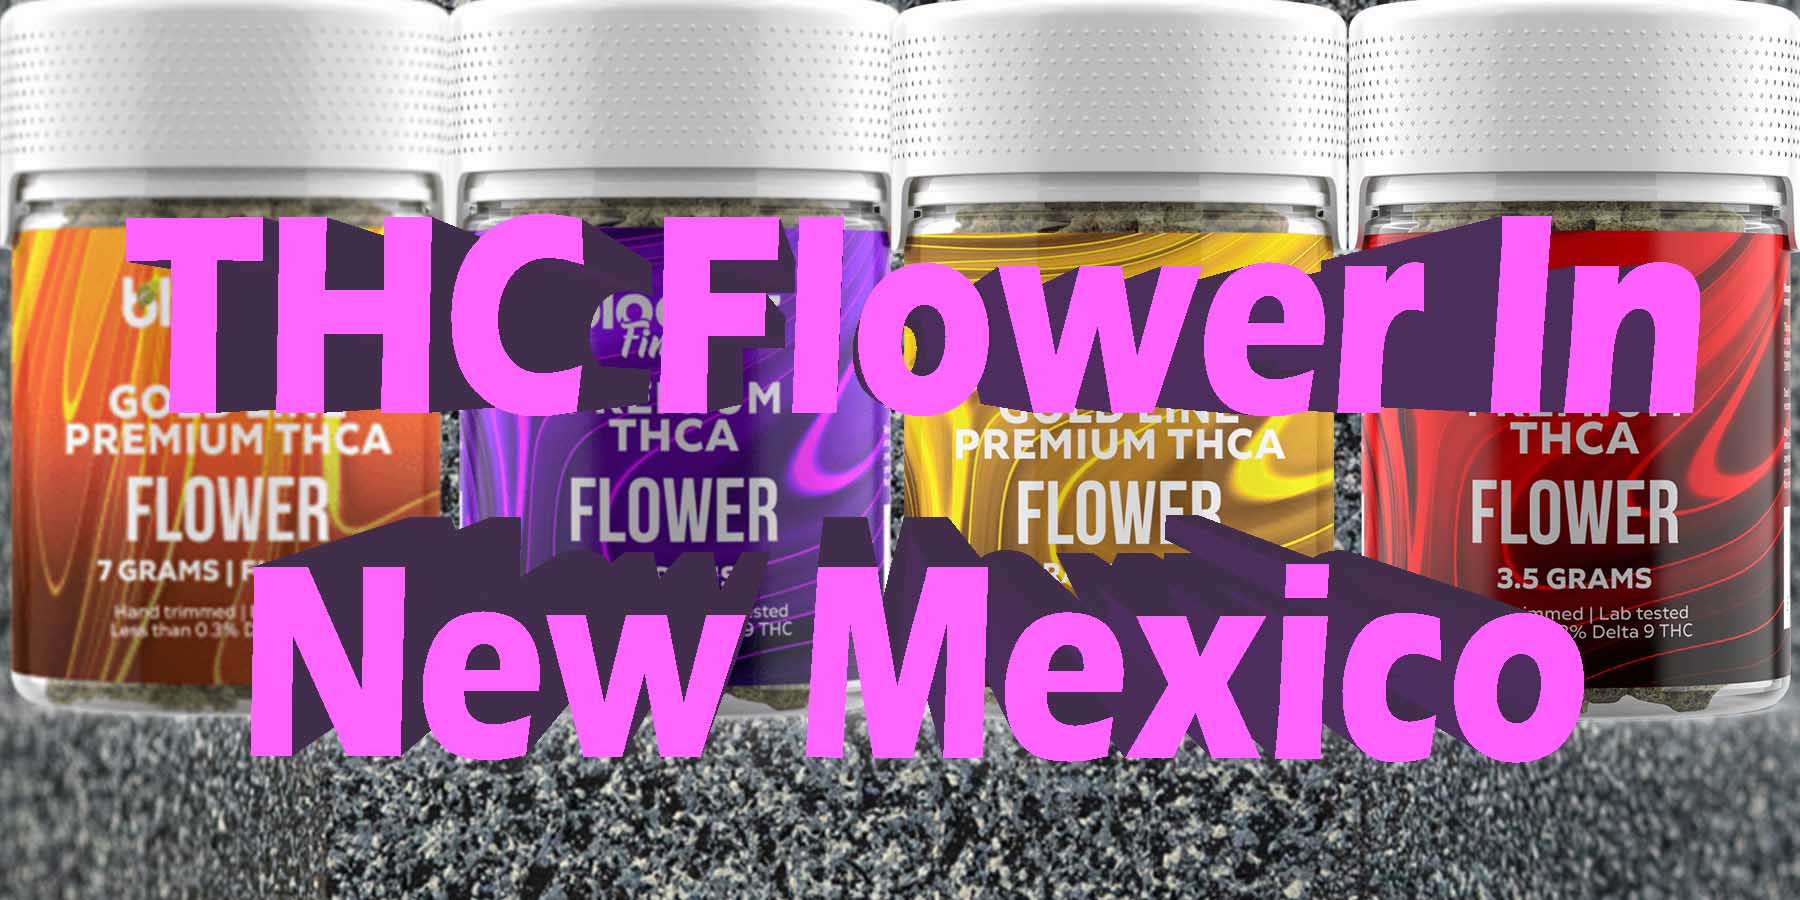 THC Flower In New Mexico WhereToGet HowToGetNearMe BestPlace LowestPrice Coupon Discount For Smoking Best High Smoke Shop Online Near Me StrongestBrand-BestBrand Binoid